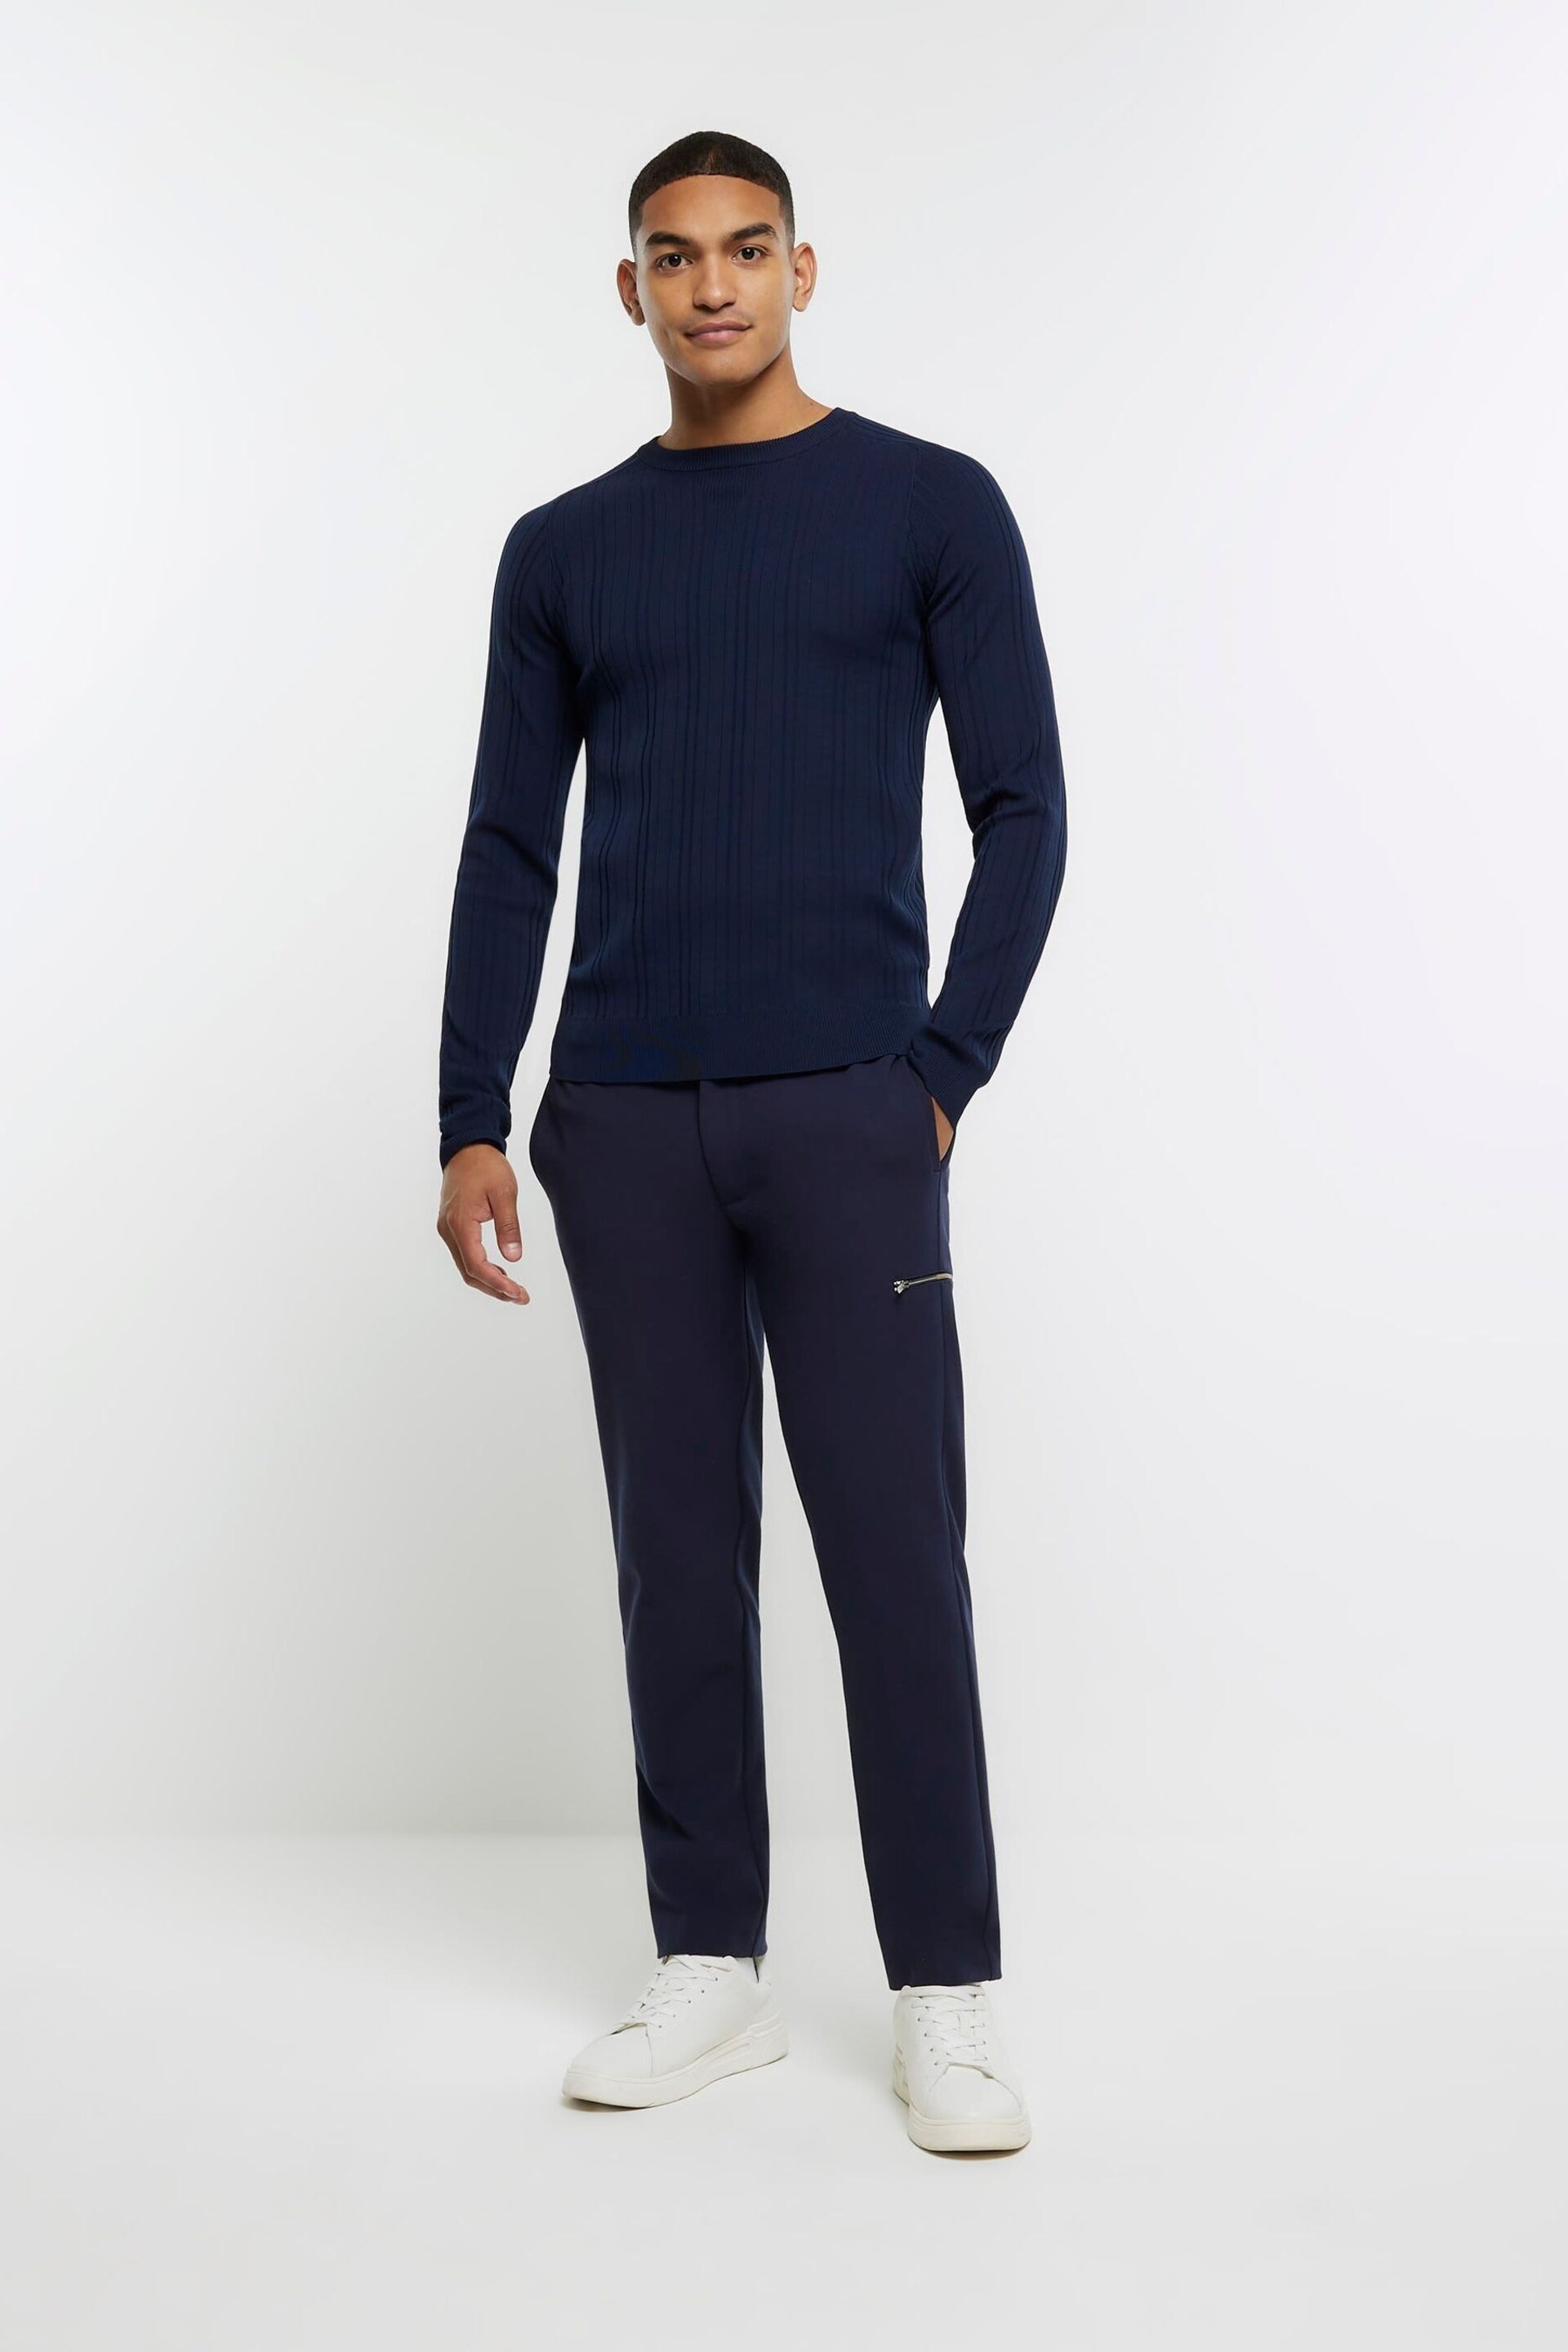 River Island Blue Muscle Fit Ribbed Jumper - Image 3 of 6